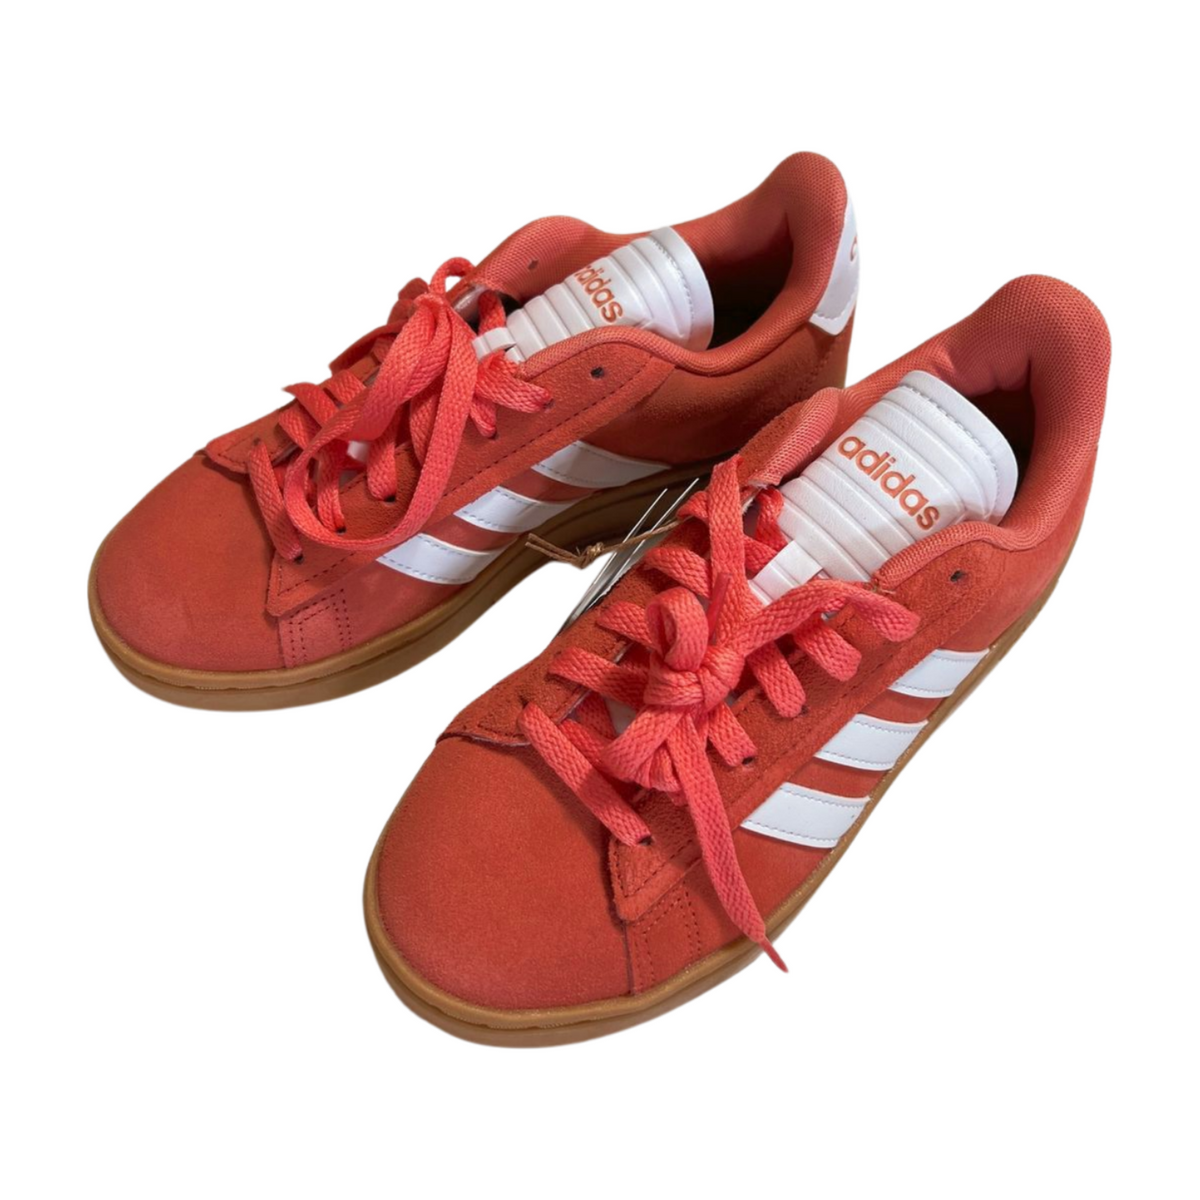 Adidas- Pink "Court Alpha" Sneakers NEW WITH TAGS!